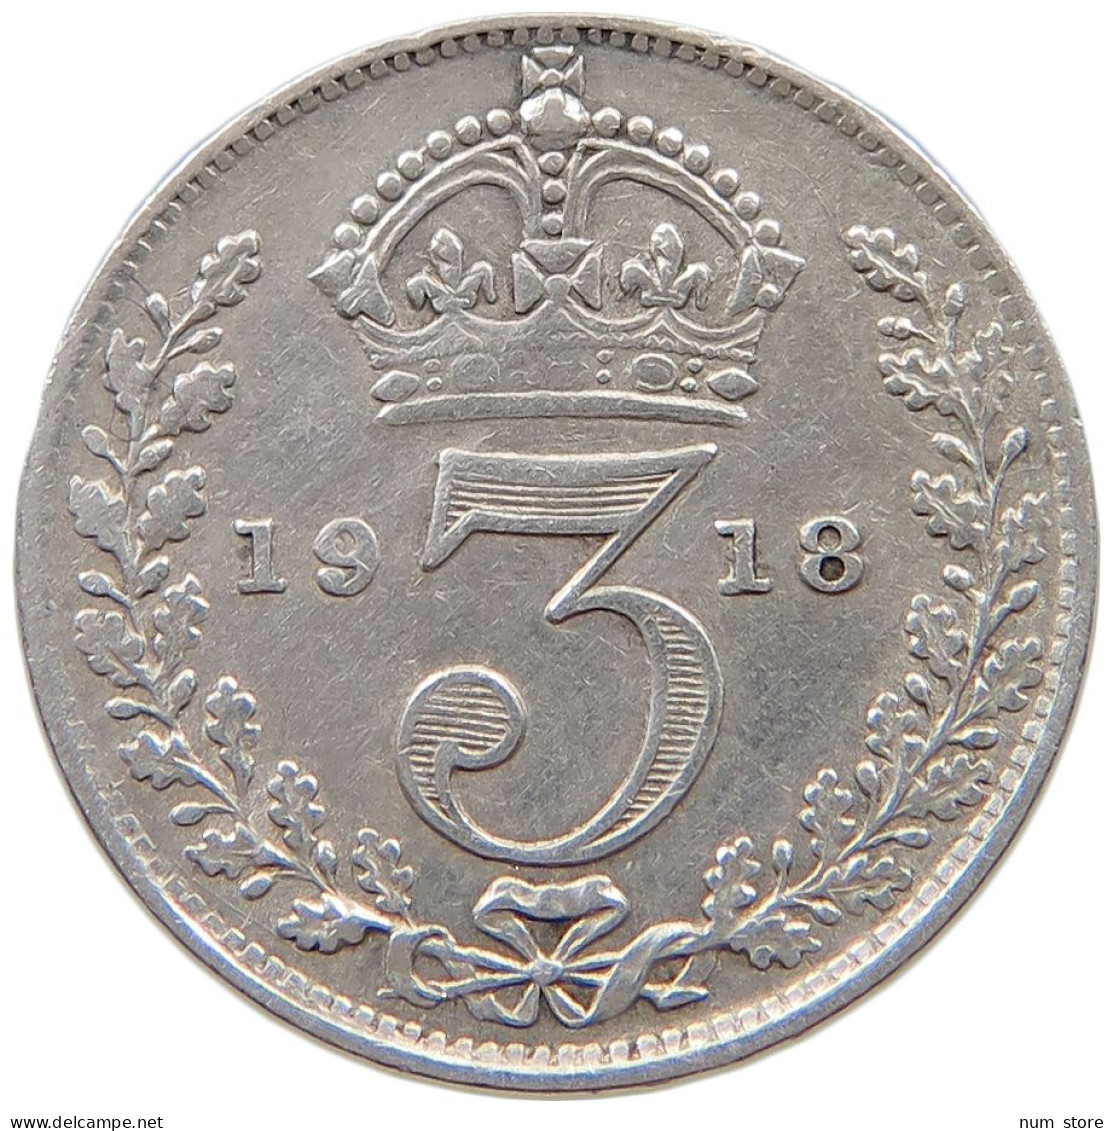 GREAT BRITAIN THREEPENCE 1918 George V. (1910-1936) #a004 0351 - F. 3 Pence